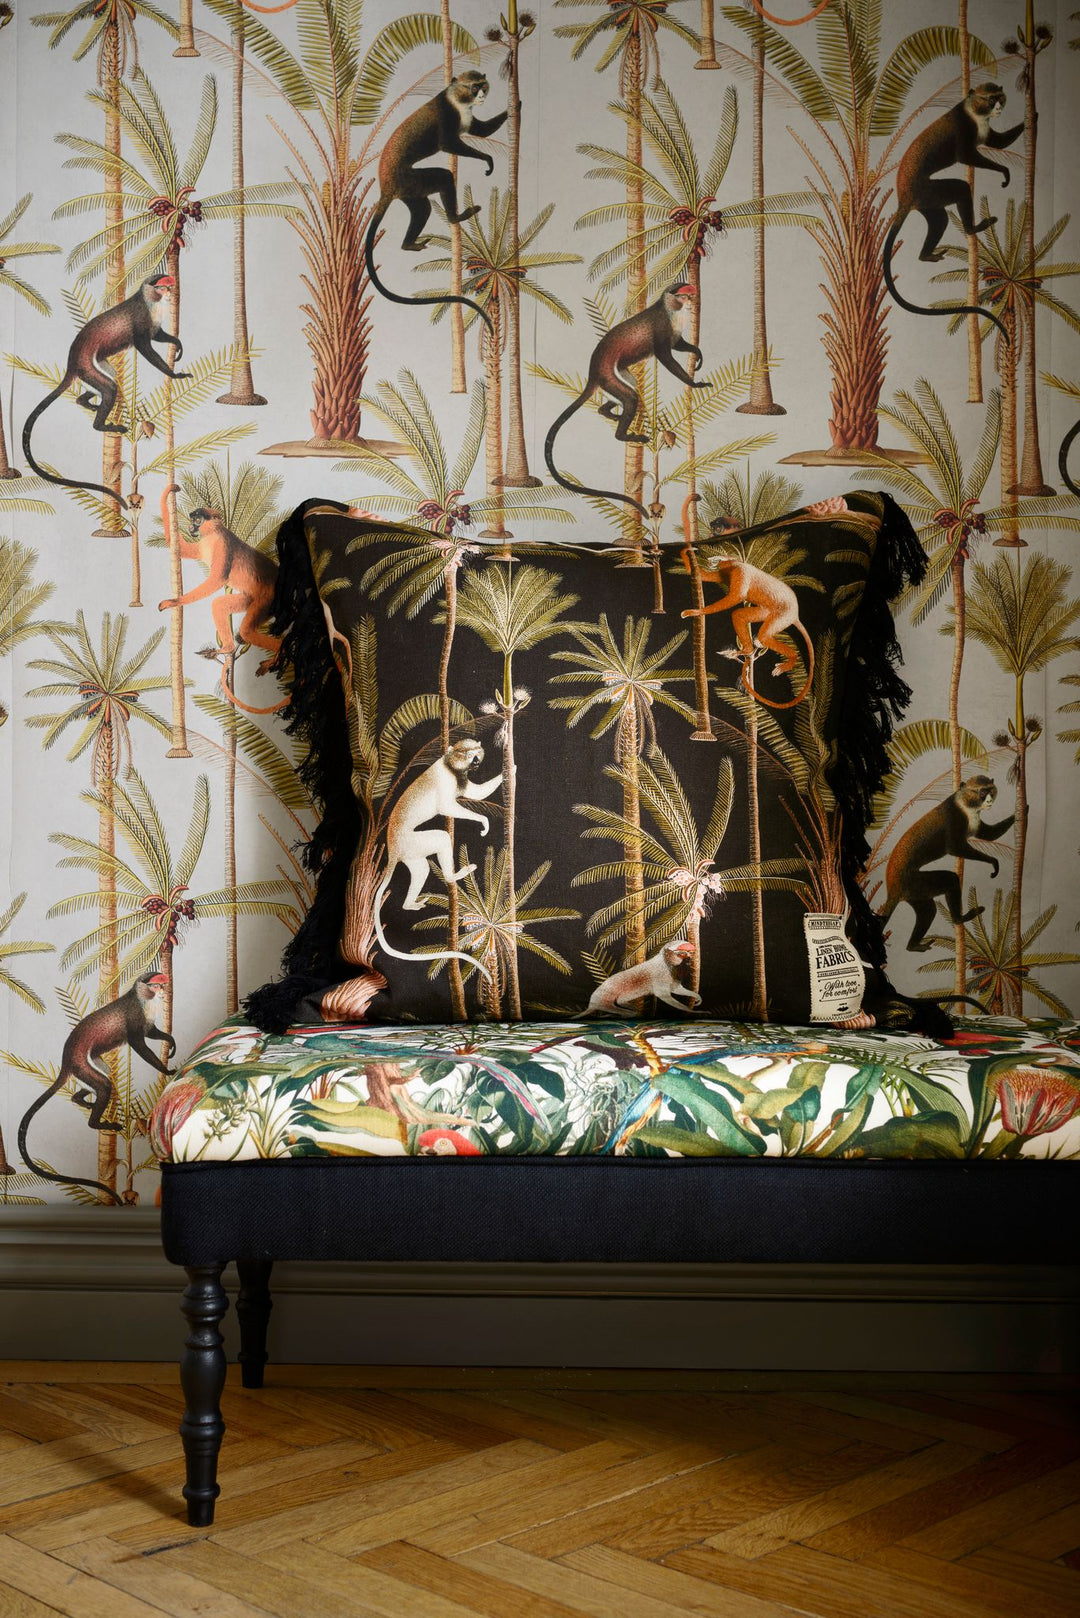 mind the gap anthracite linen fabric barbados monkeys and palm trees